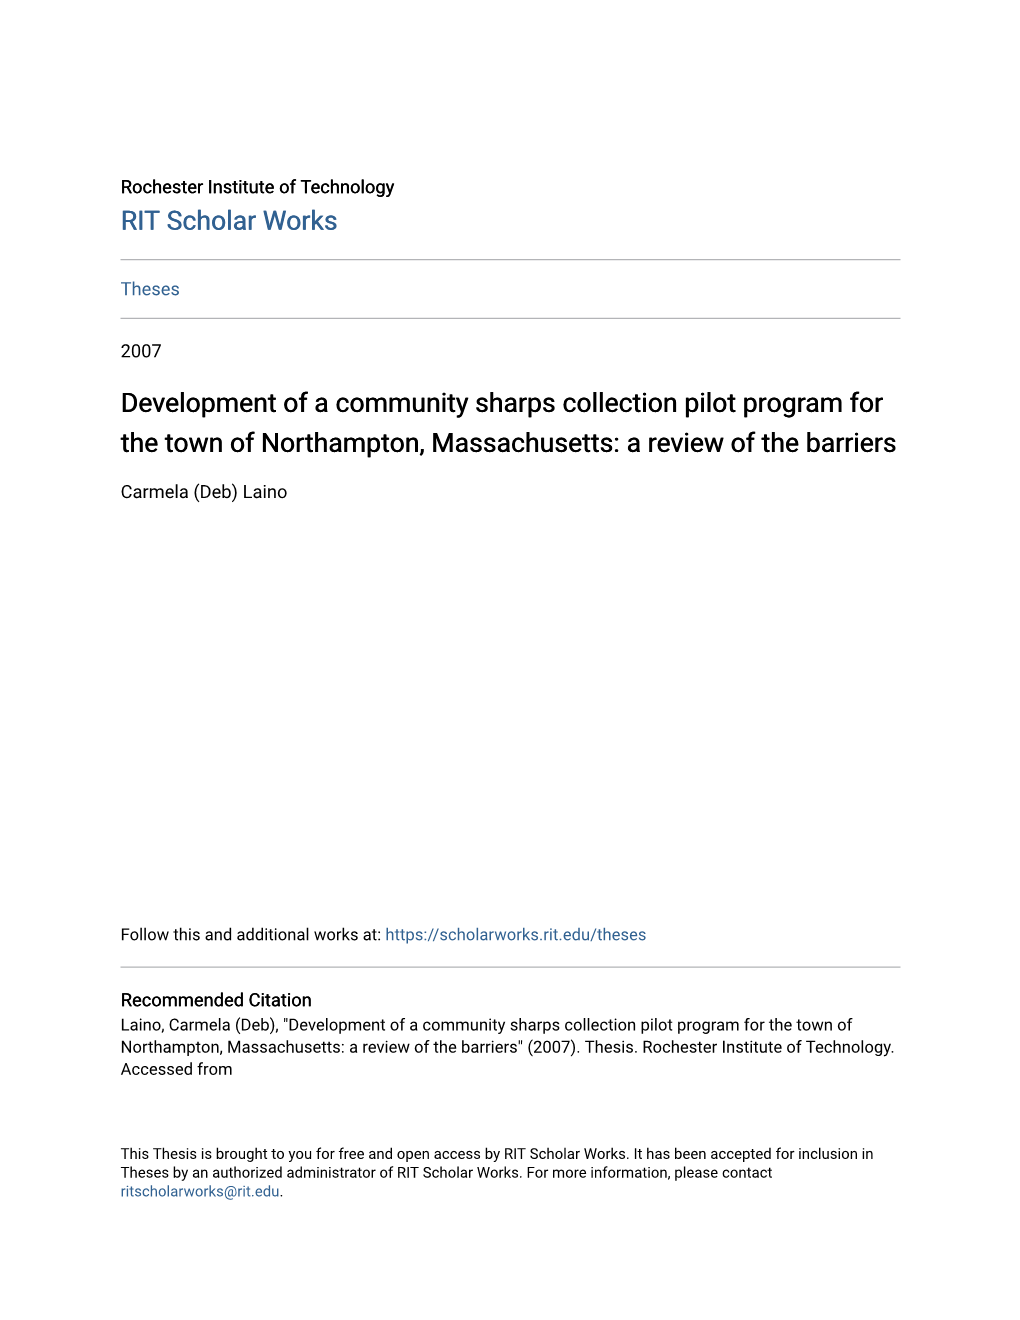 Development of a Community Sharps Collection Pilot Program for the Town of Northampton, Massachusetts: a Review of the Barriers